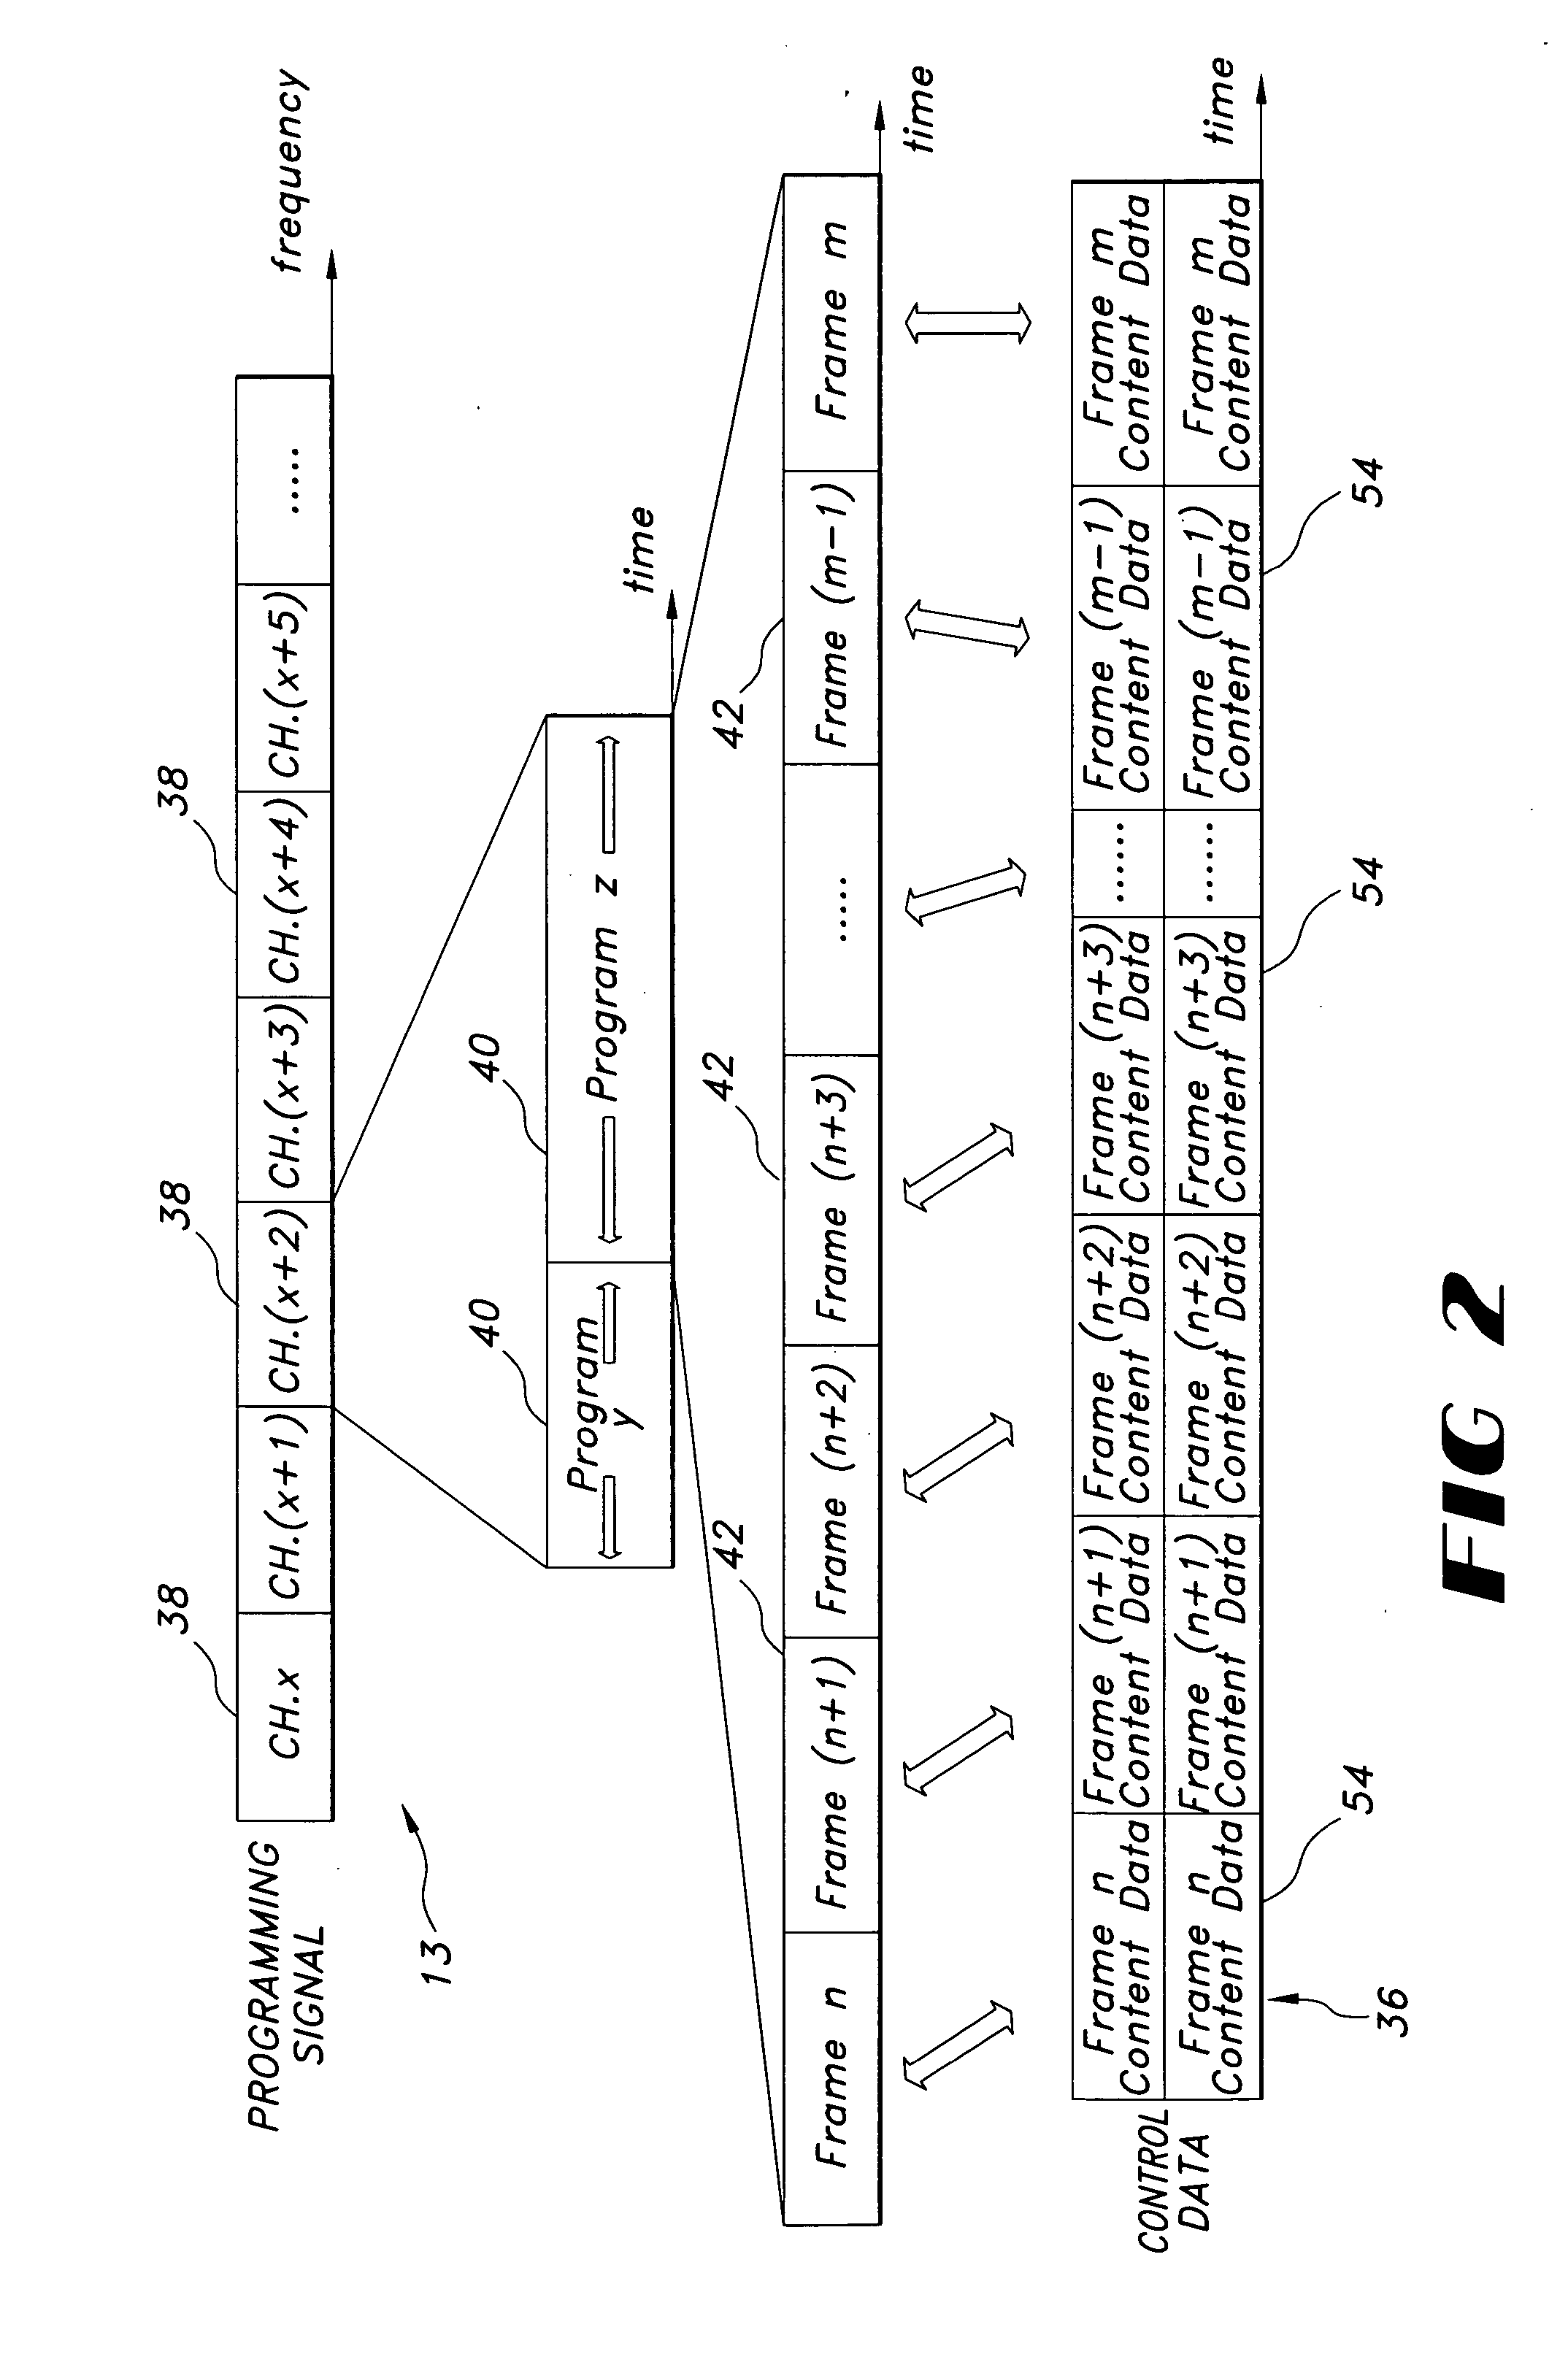 Method for formulating, delivering and managing data concerning programming content and portions thereof